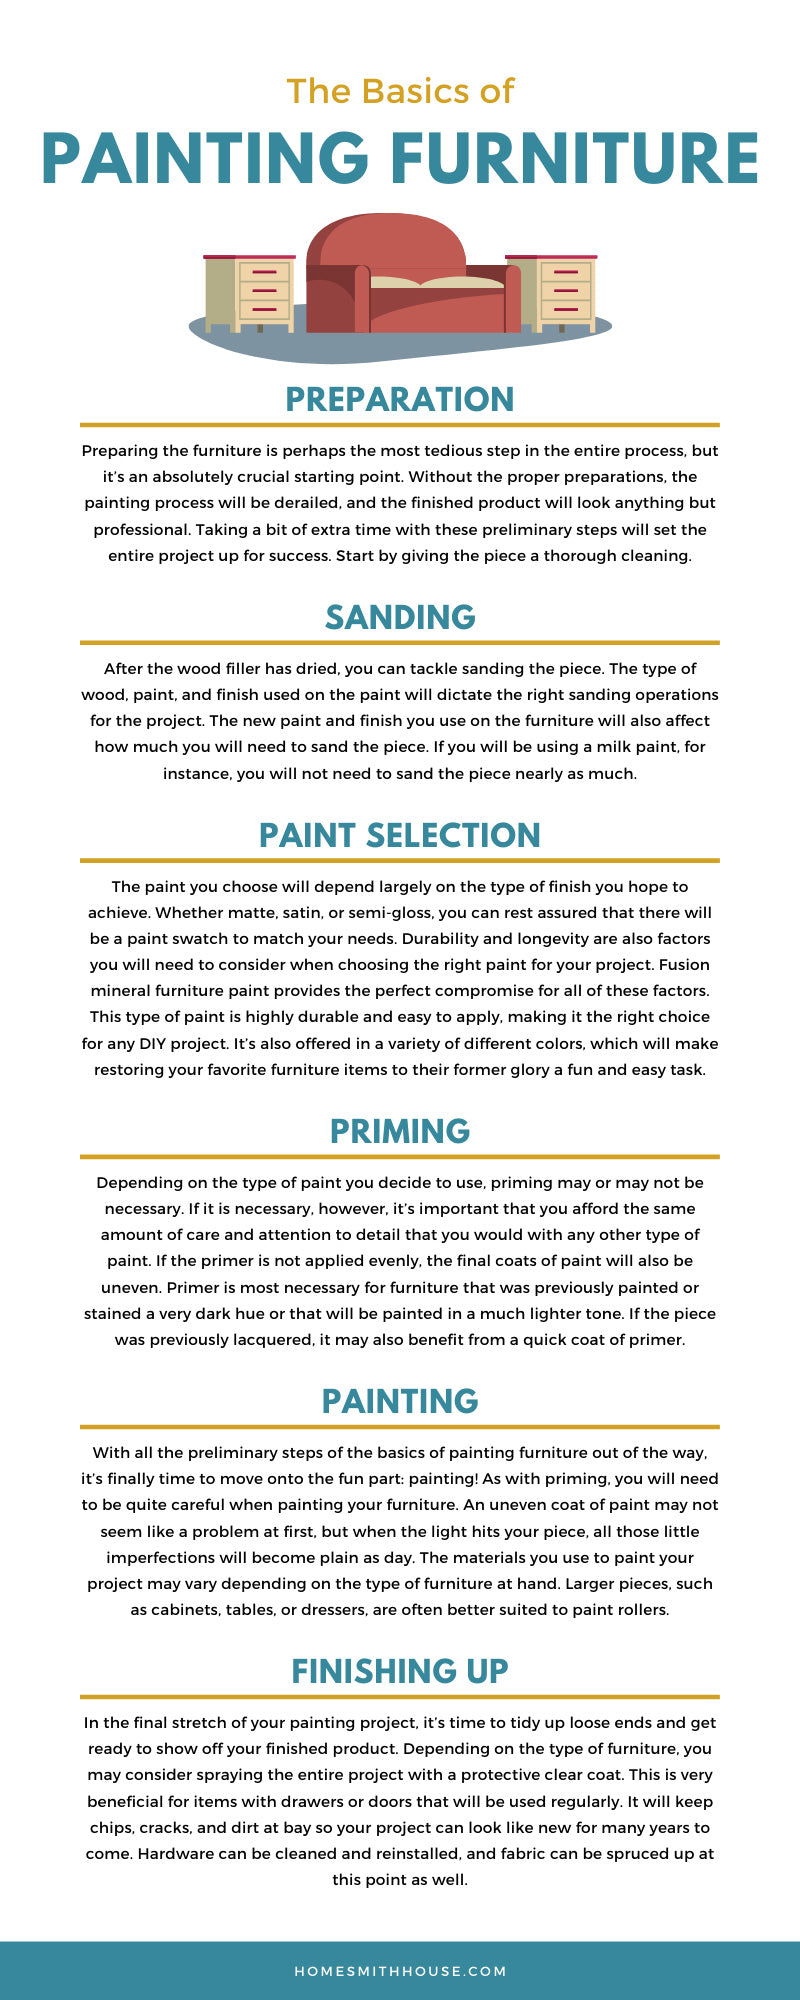 The Basics of Painting Furniture